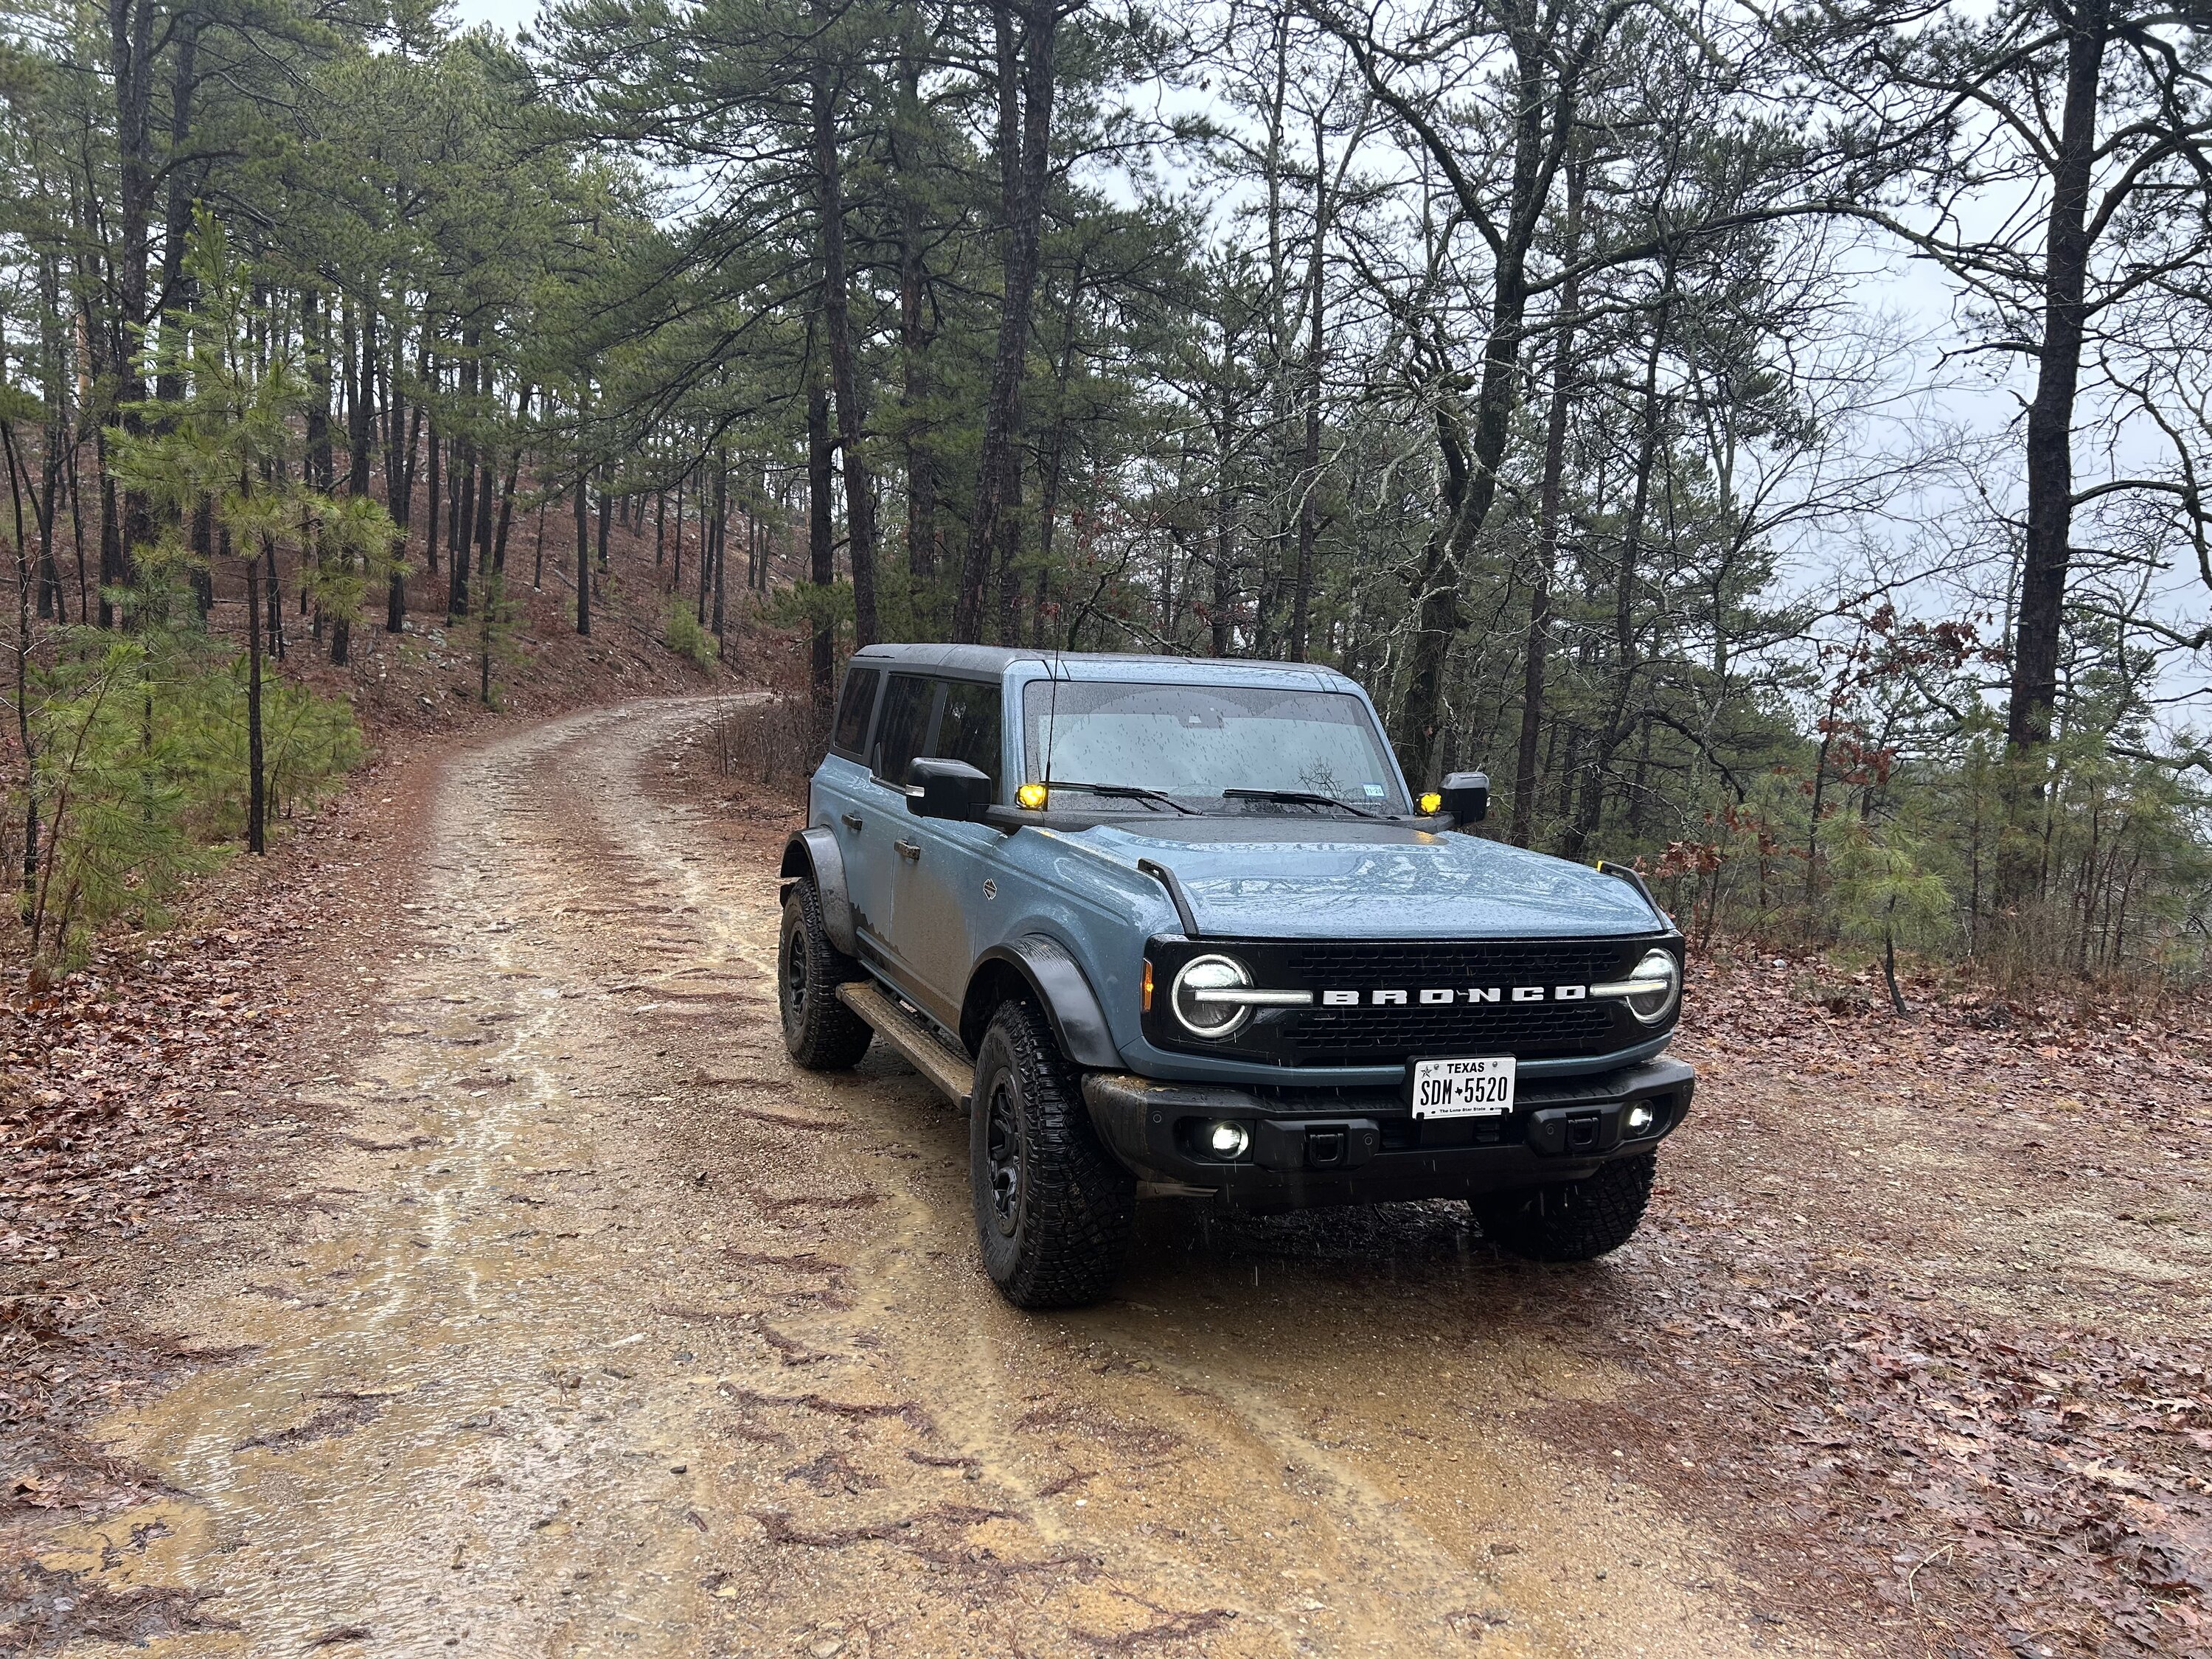 Ford Bronco HOSS 3.0 - Trail run review: as good if not better than my gen2 Raptor 4E88F978-73C5-405C-8F3B-4A0330840F0B